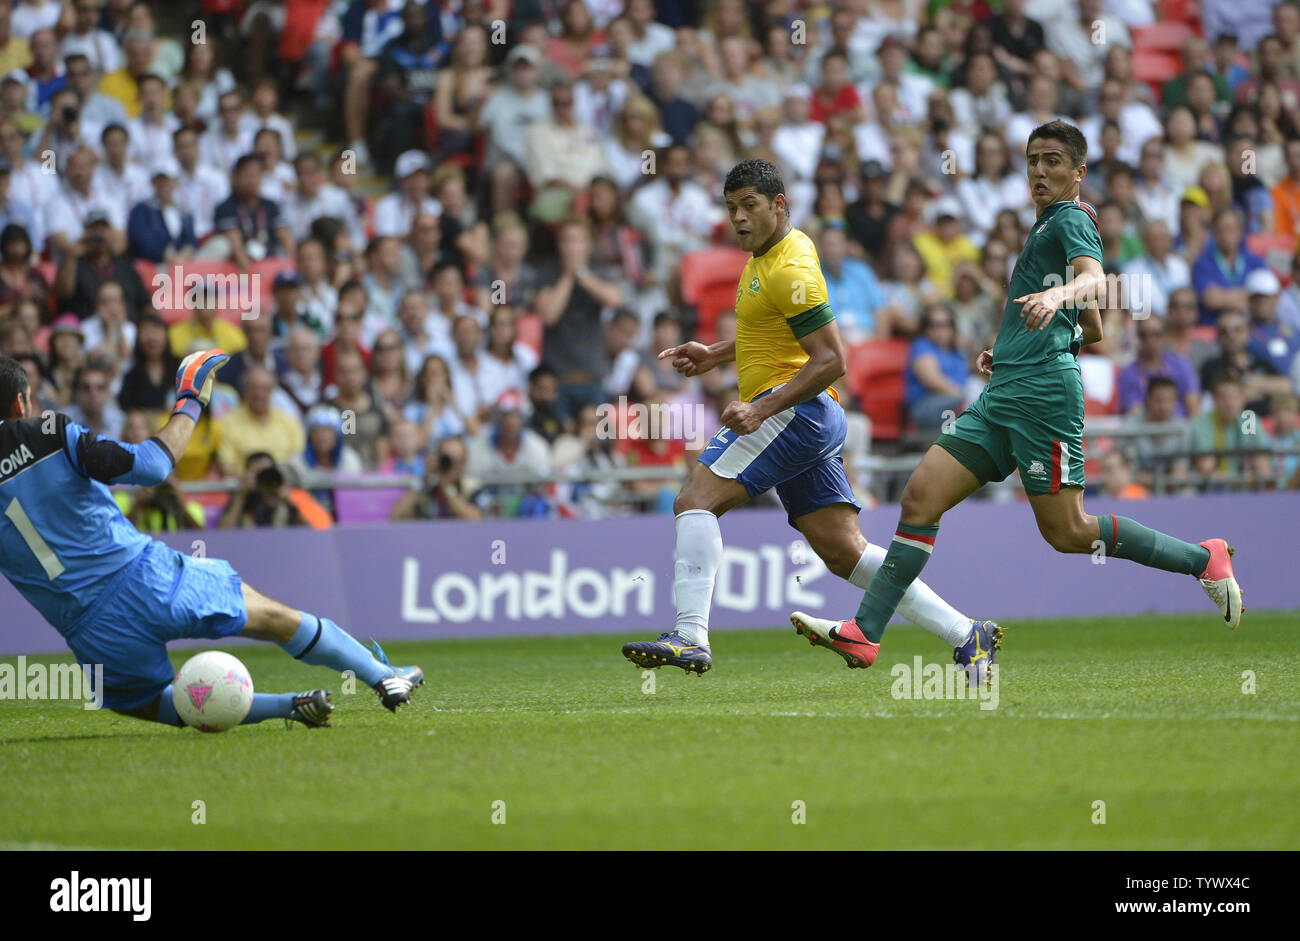 Forward Hulk of Brazil (C) scores past goalkeeper Jose Corona of Mexico (L) as defender Darvin Chavez of Mexico defends during the second half of the Gold Medal Football Match at the London 2012 Summer Olympics on August 11, 2012 at Wembley Stadium, London. Mexico defeated Brazil 2-1 to win the Gold Medal.      UPI/Brian Kersey Stock Photo